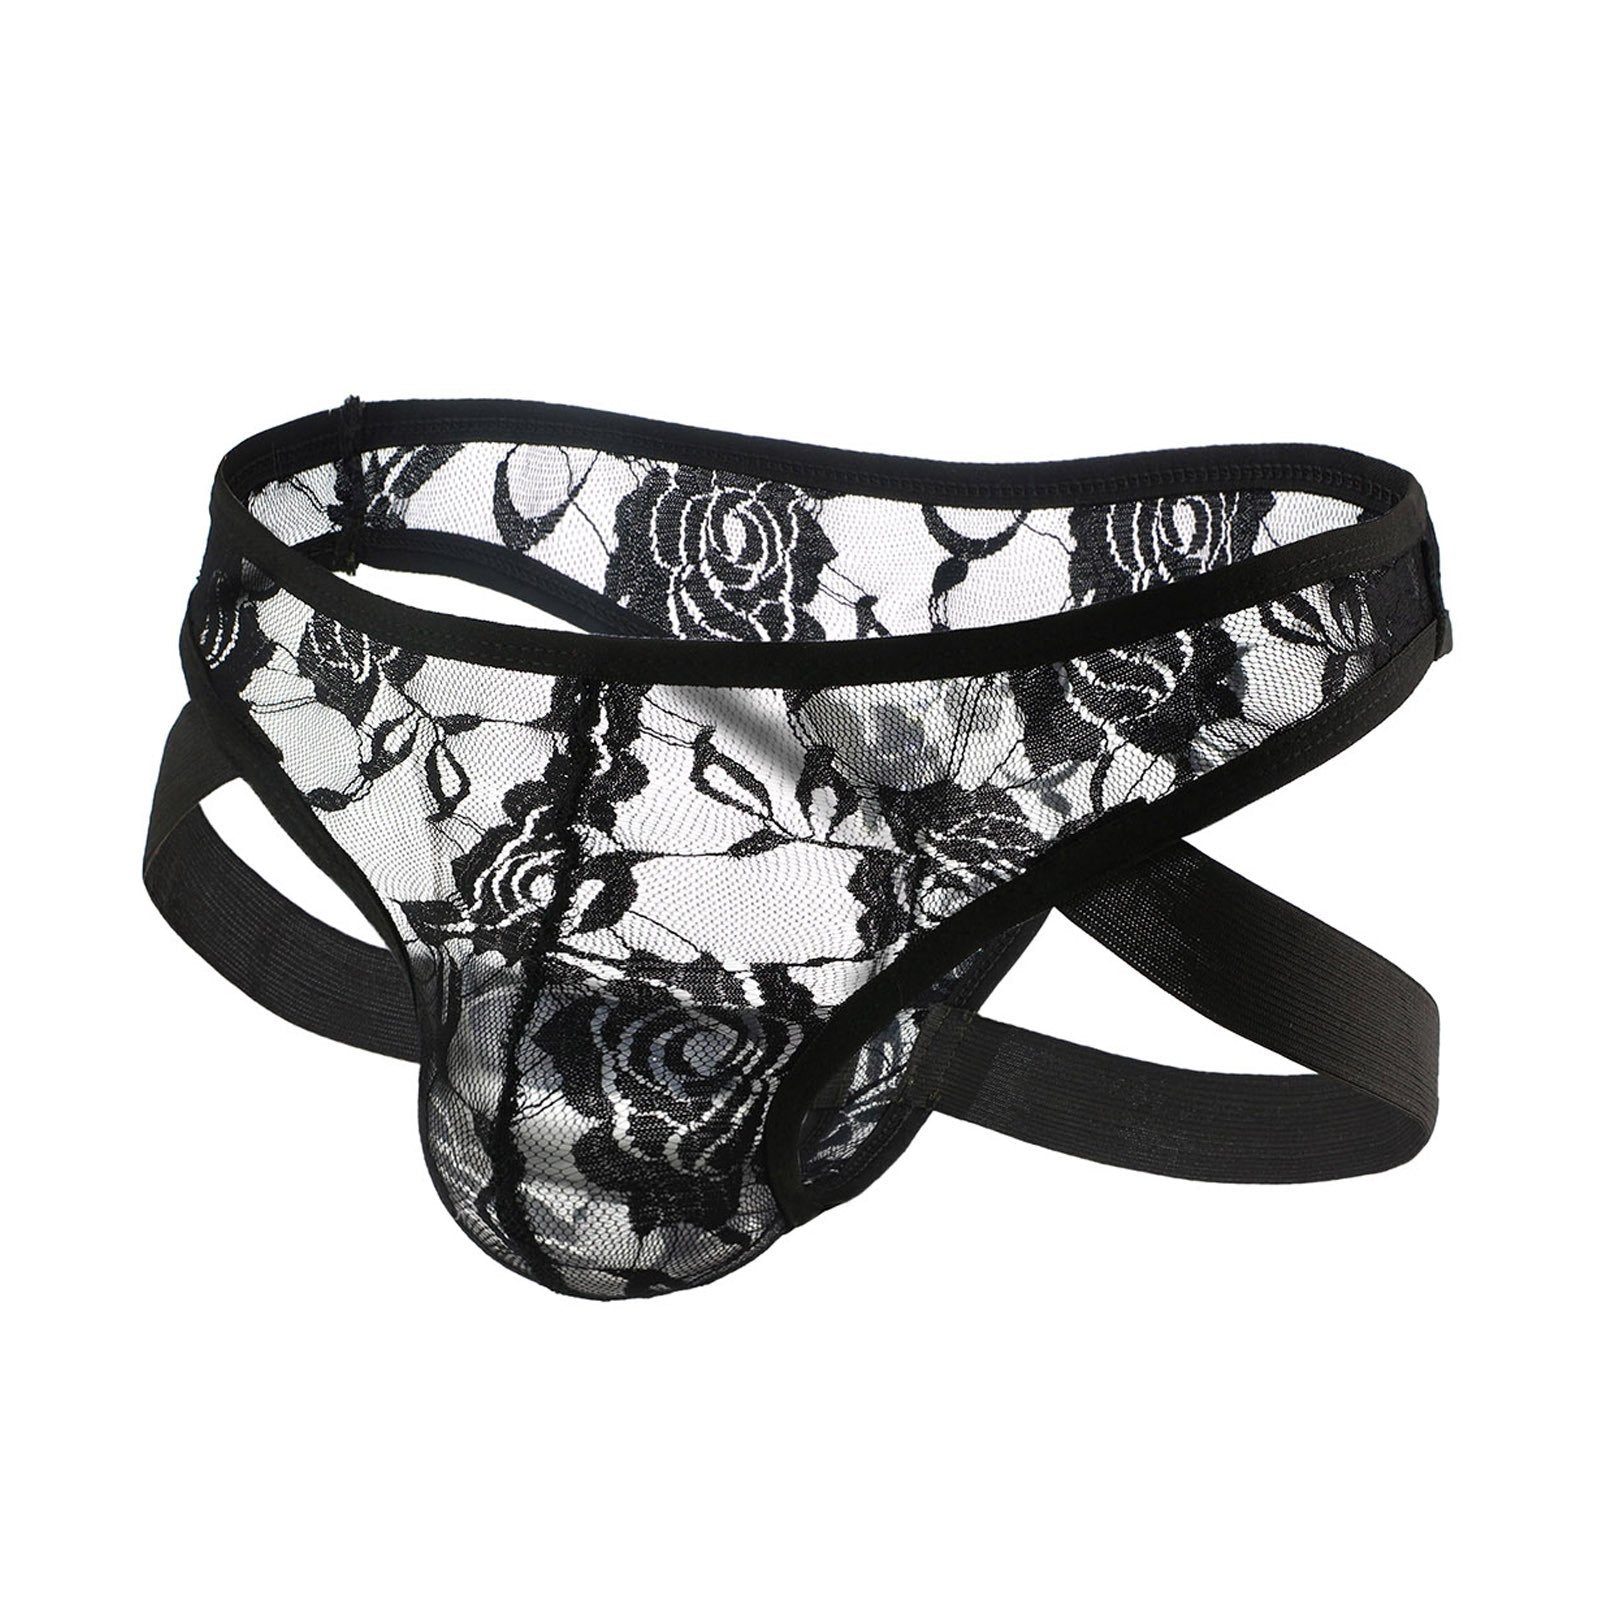 Men's Lace Sexy See-through Underwear Thong